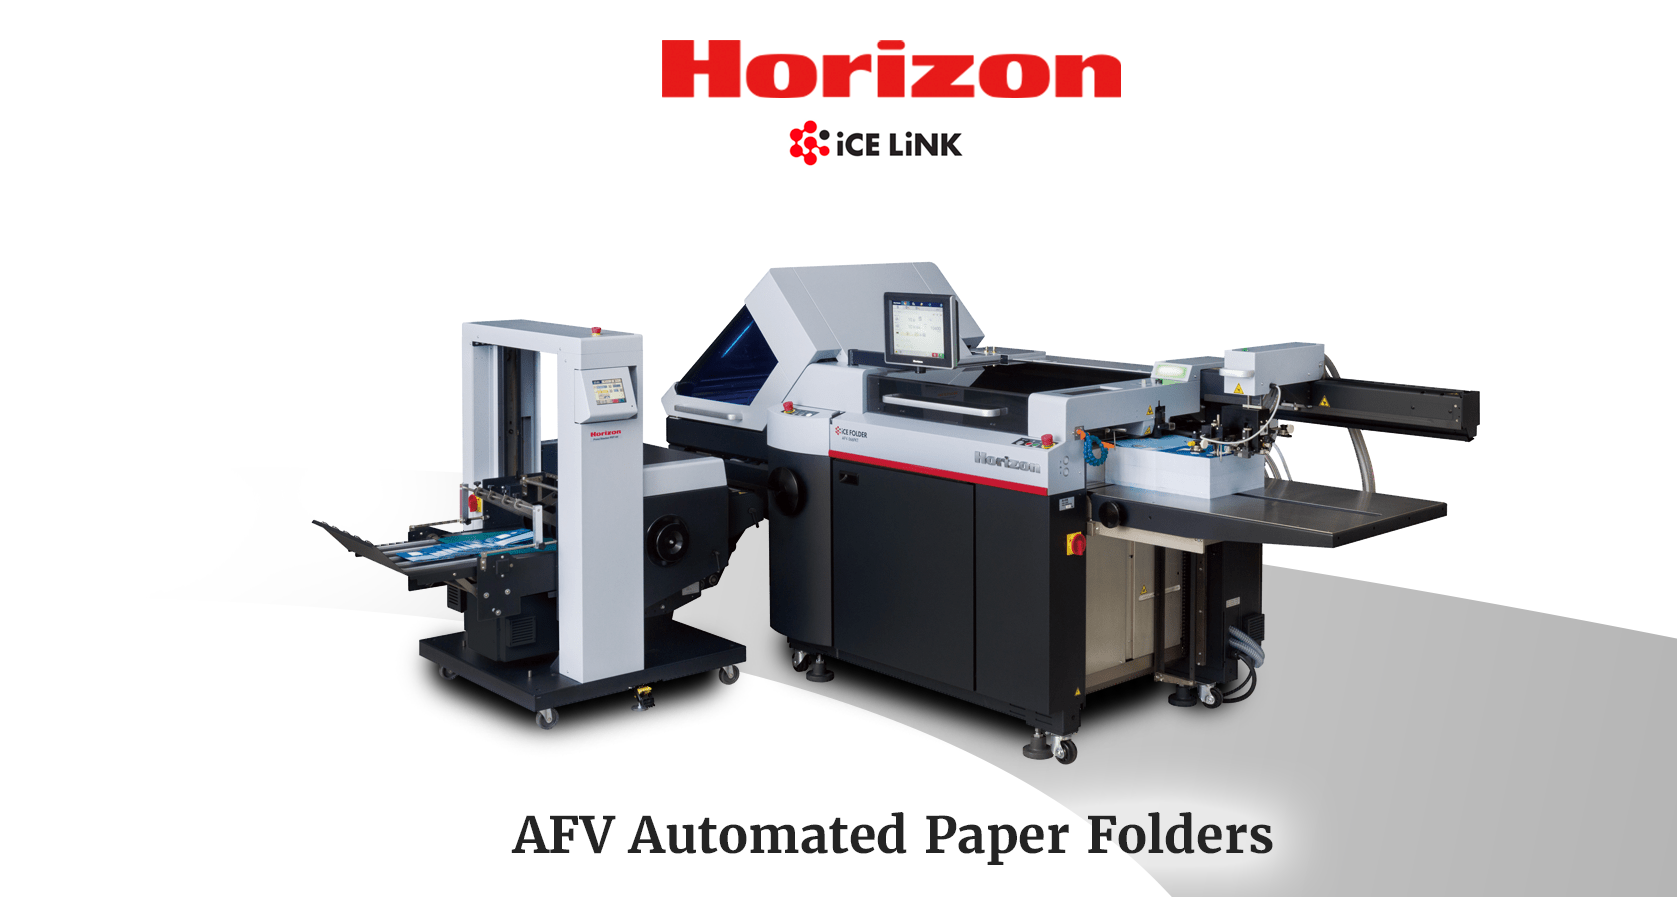 What makes A Horizon AFV Automated Paper Folder Special?